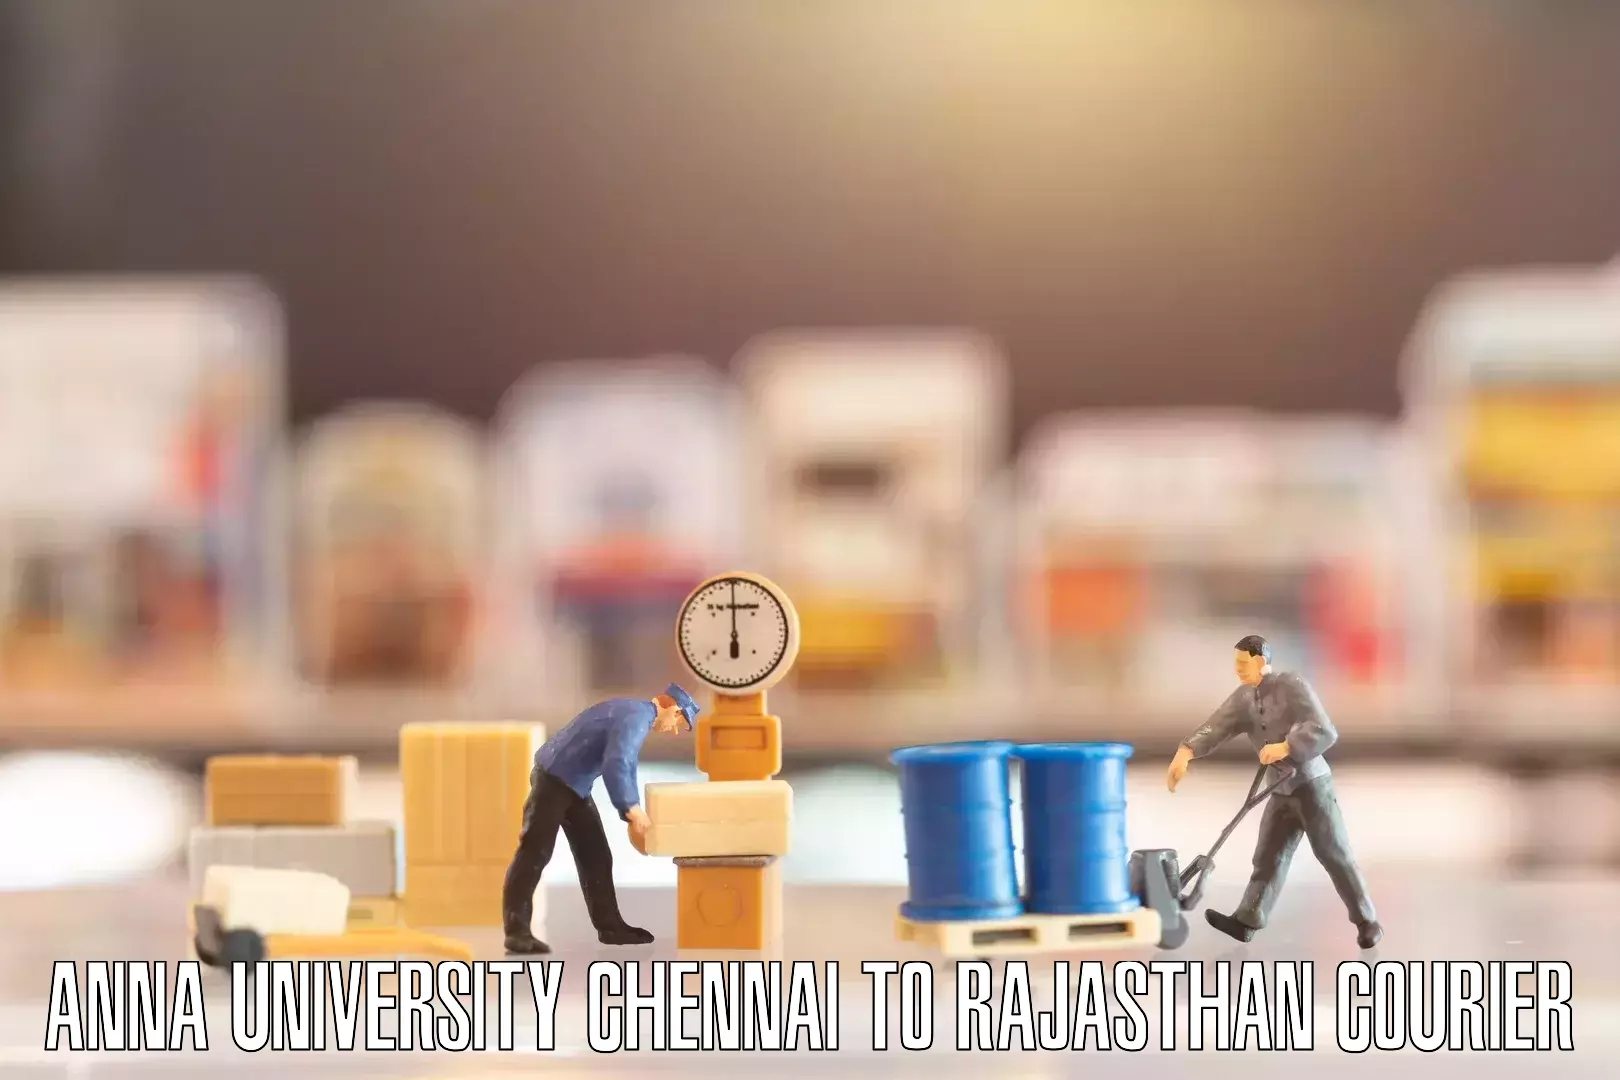 Home moving experts Anna University Chennai to Rajasthan